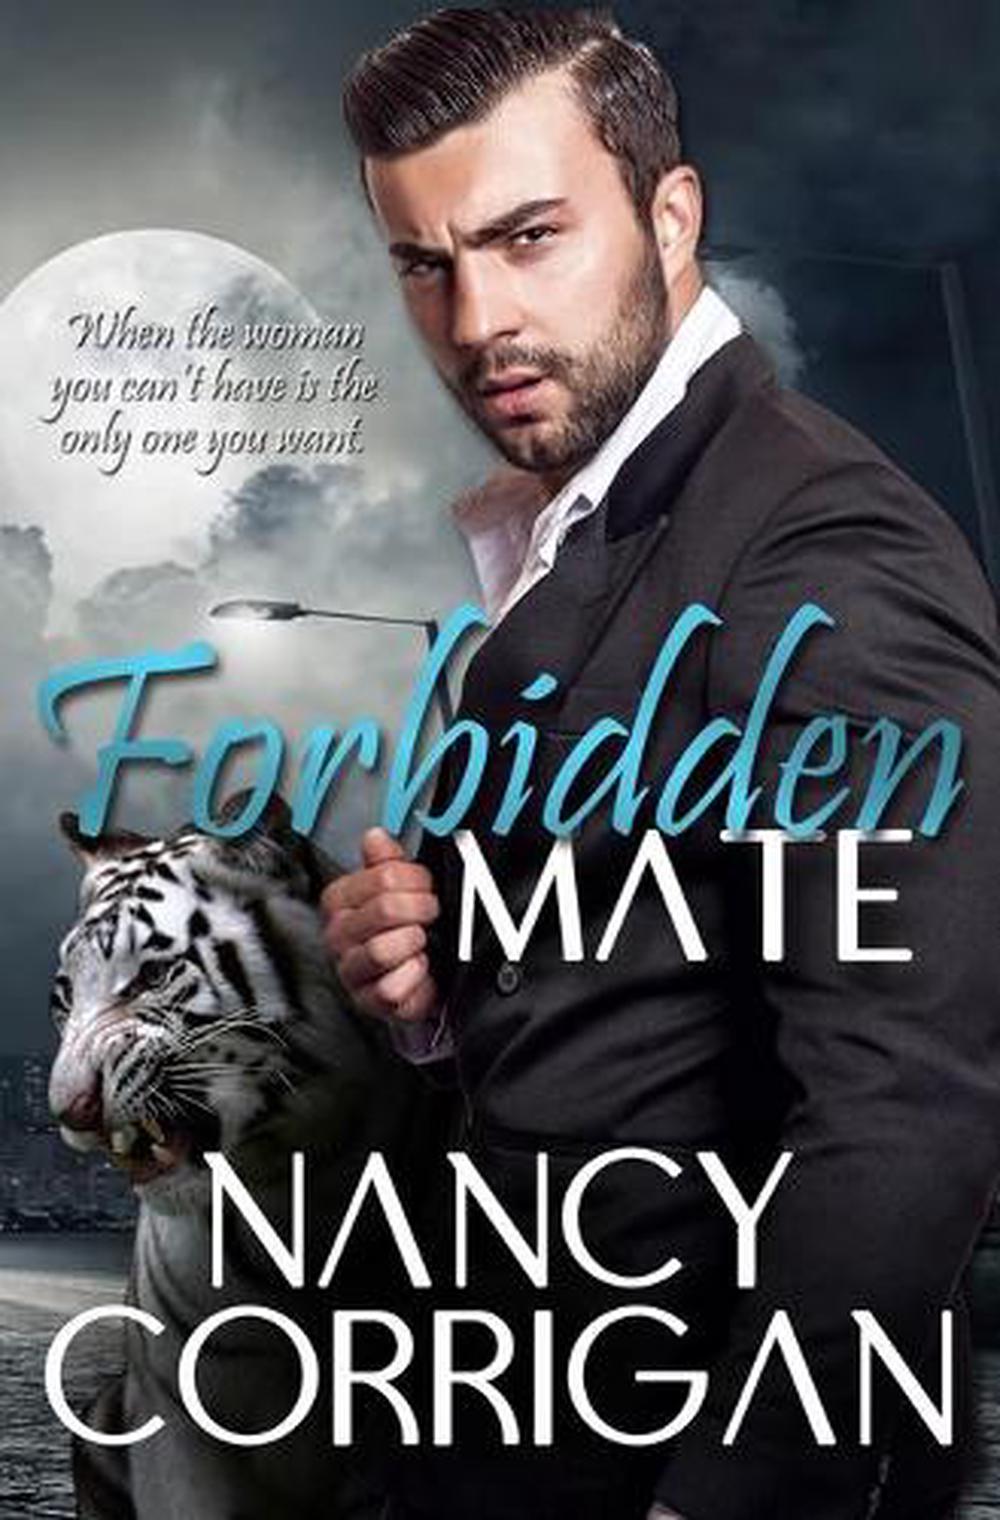 Forbidden Mate by Toni Griffin